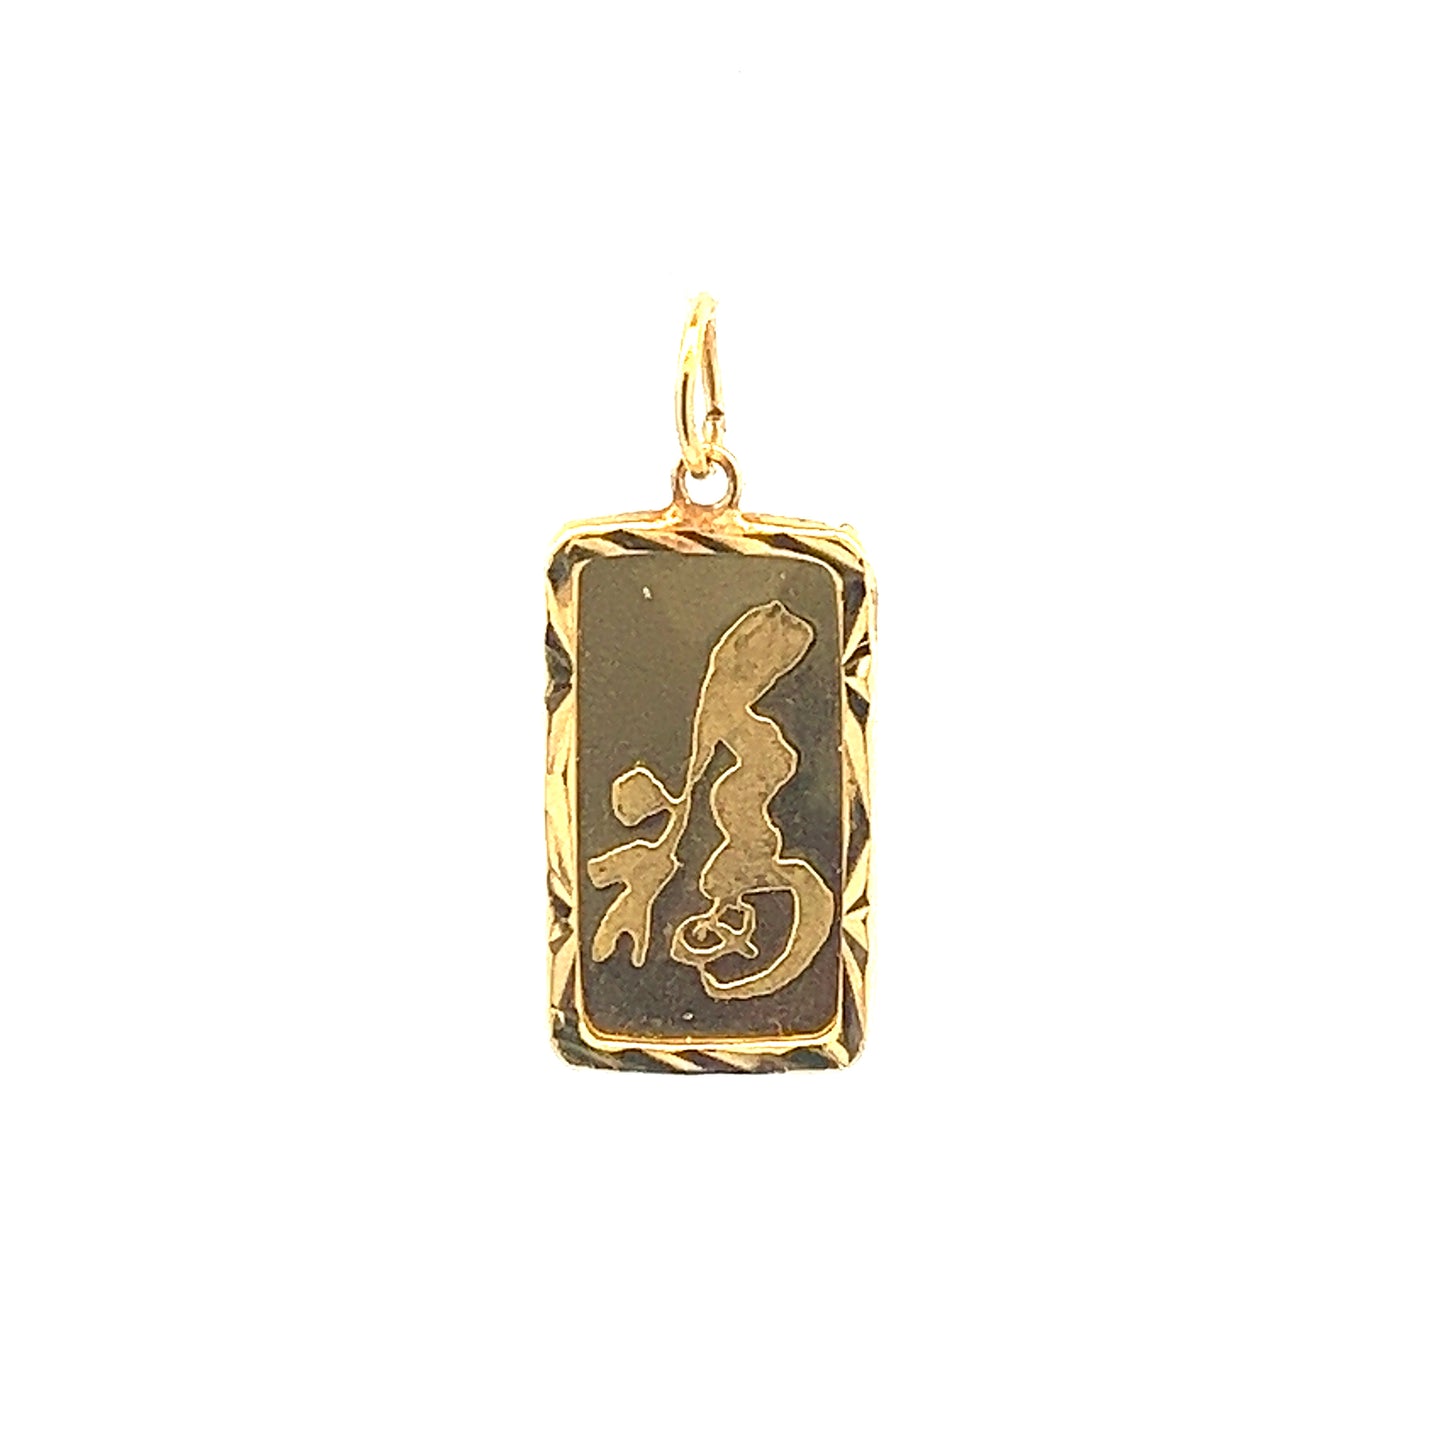 GOLD PENDANT ( 24K ) ( 1.36g ) - P002785 Chain sold separately